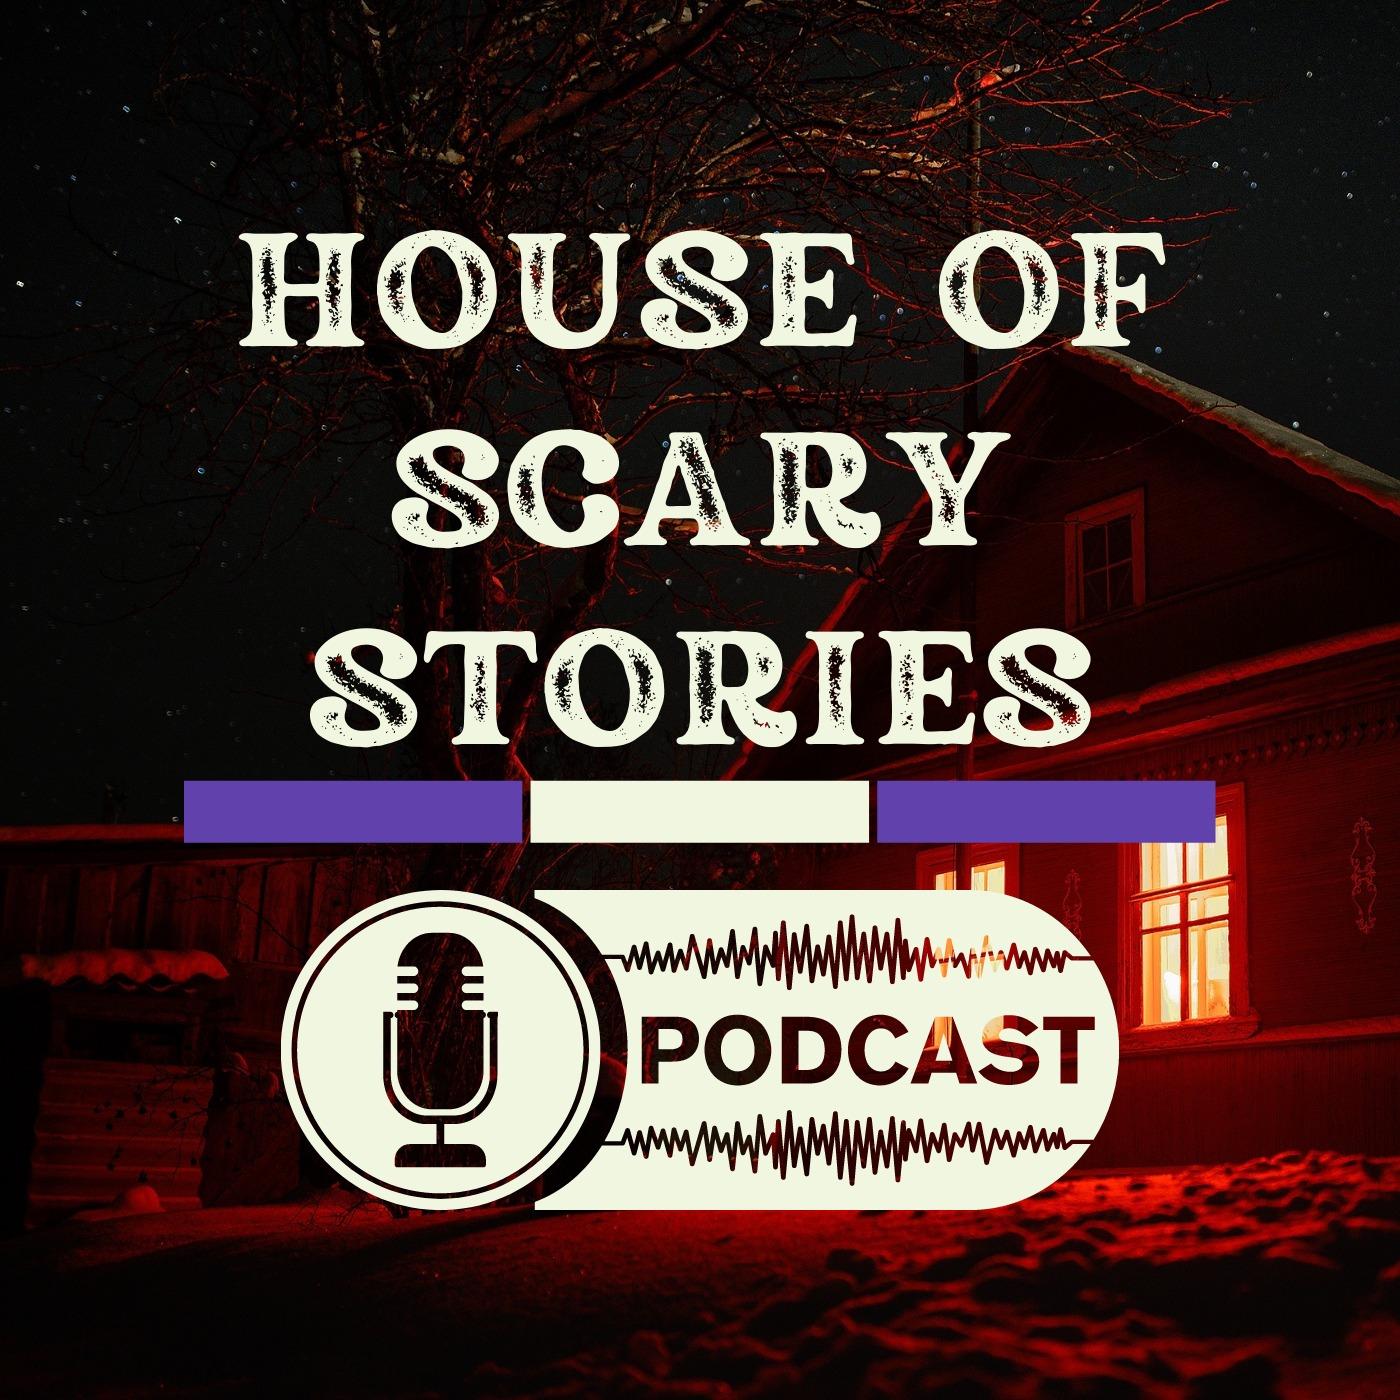 House of Scary Stories Podcast